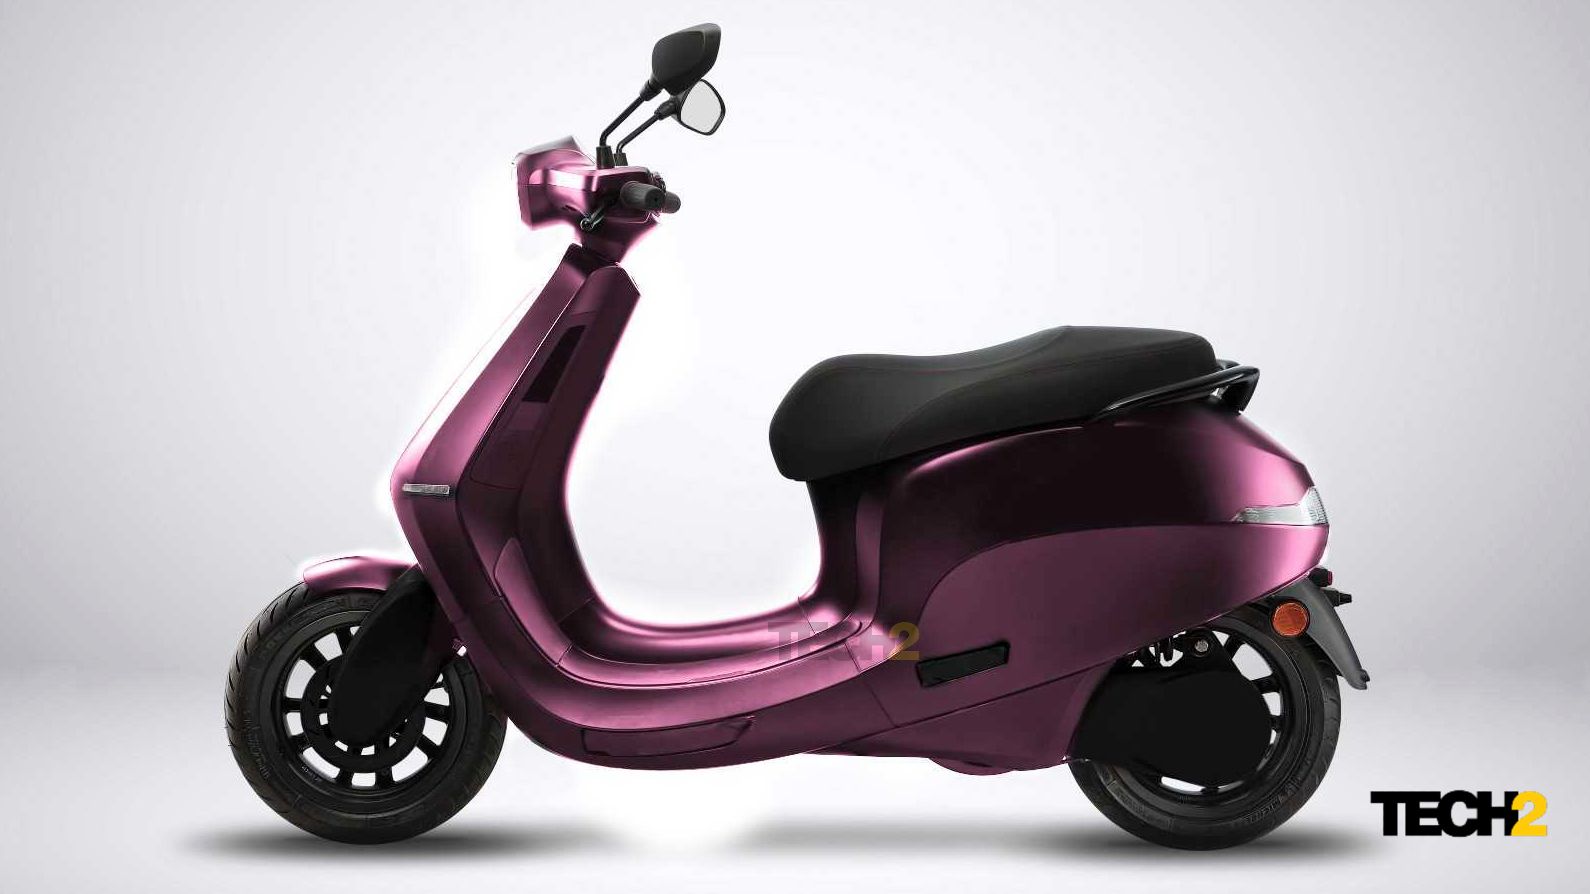 The Ola Electric series S-scooter will be delivered to buyers' homes.